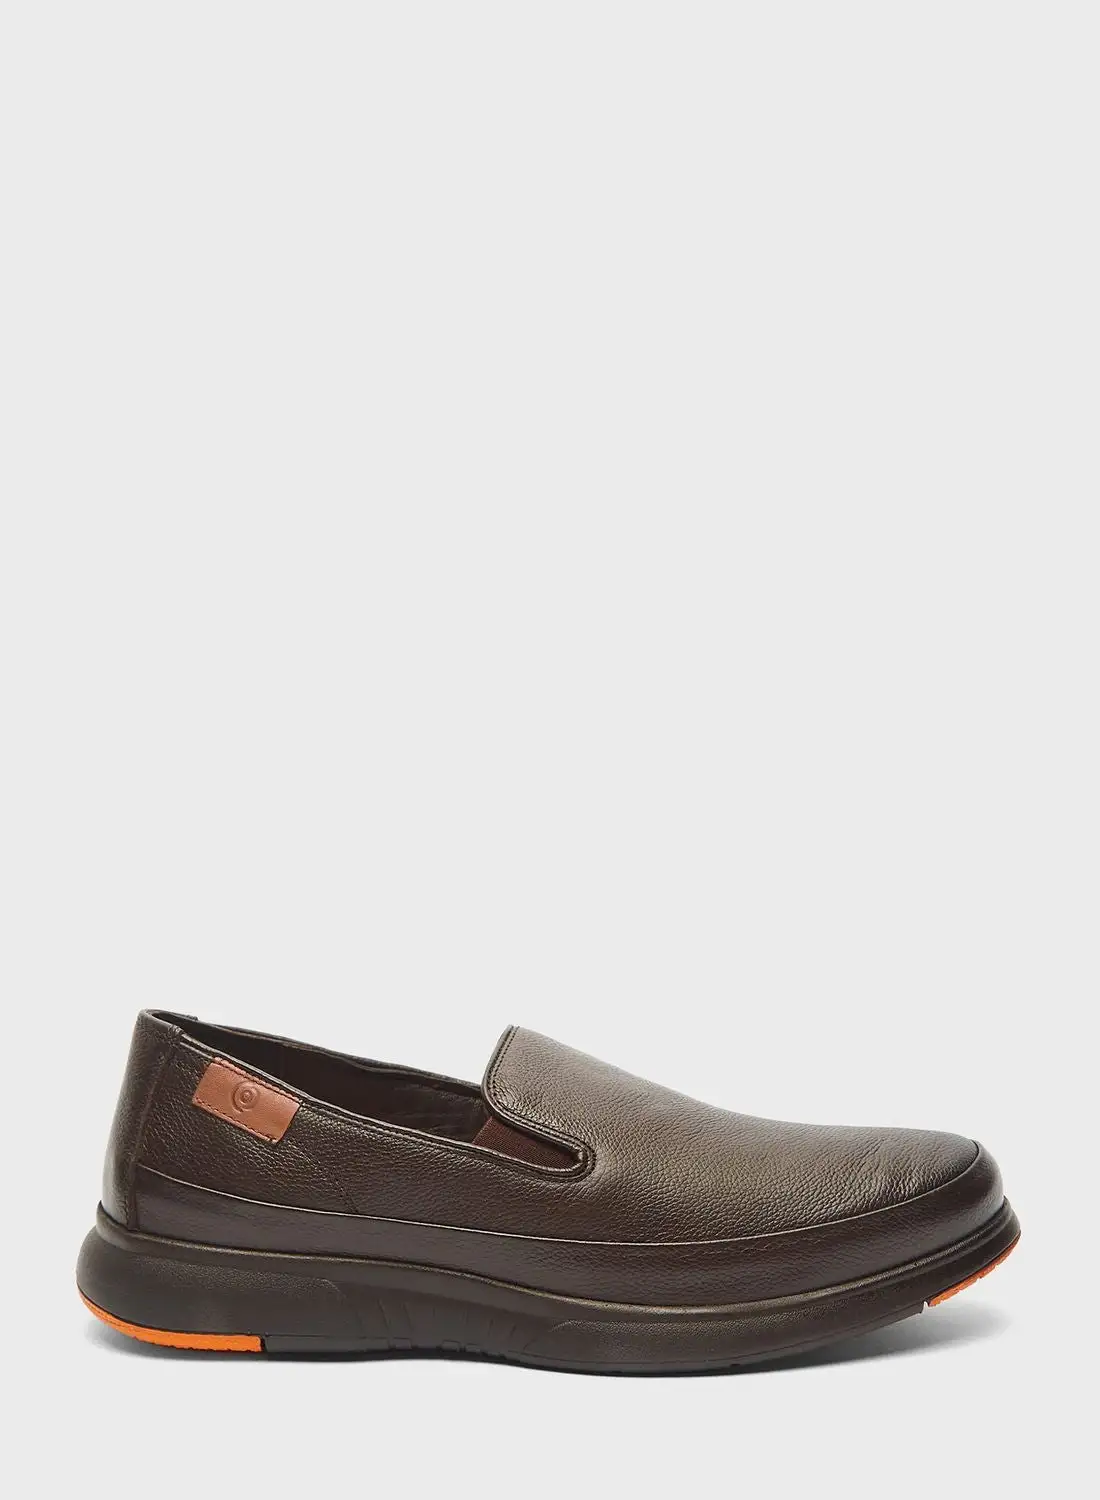 Le Confort Casual Slip Ons Shoes